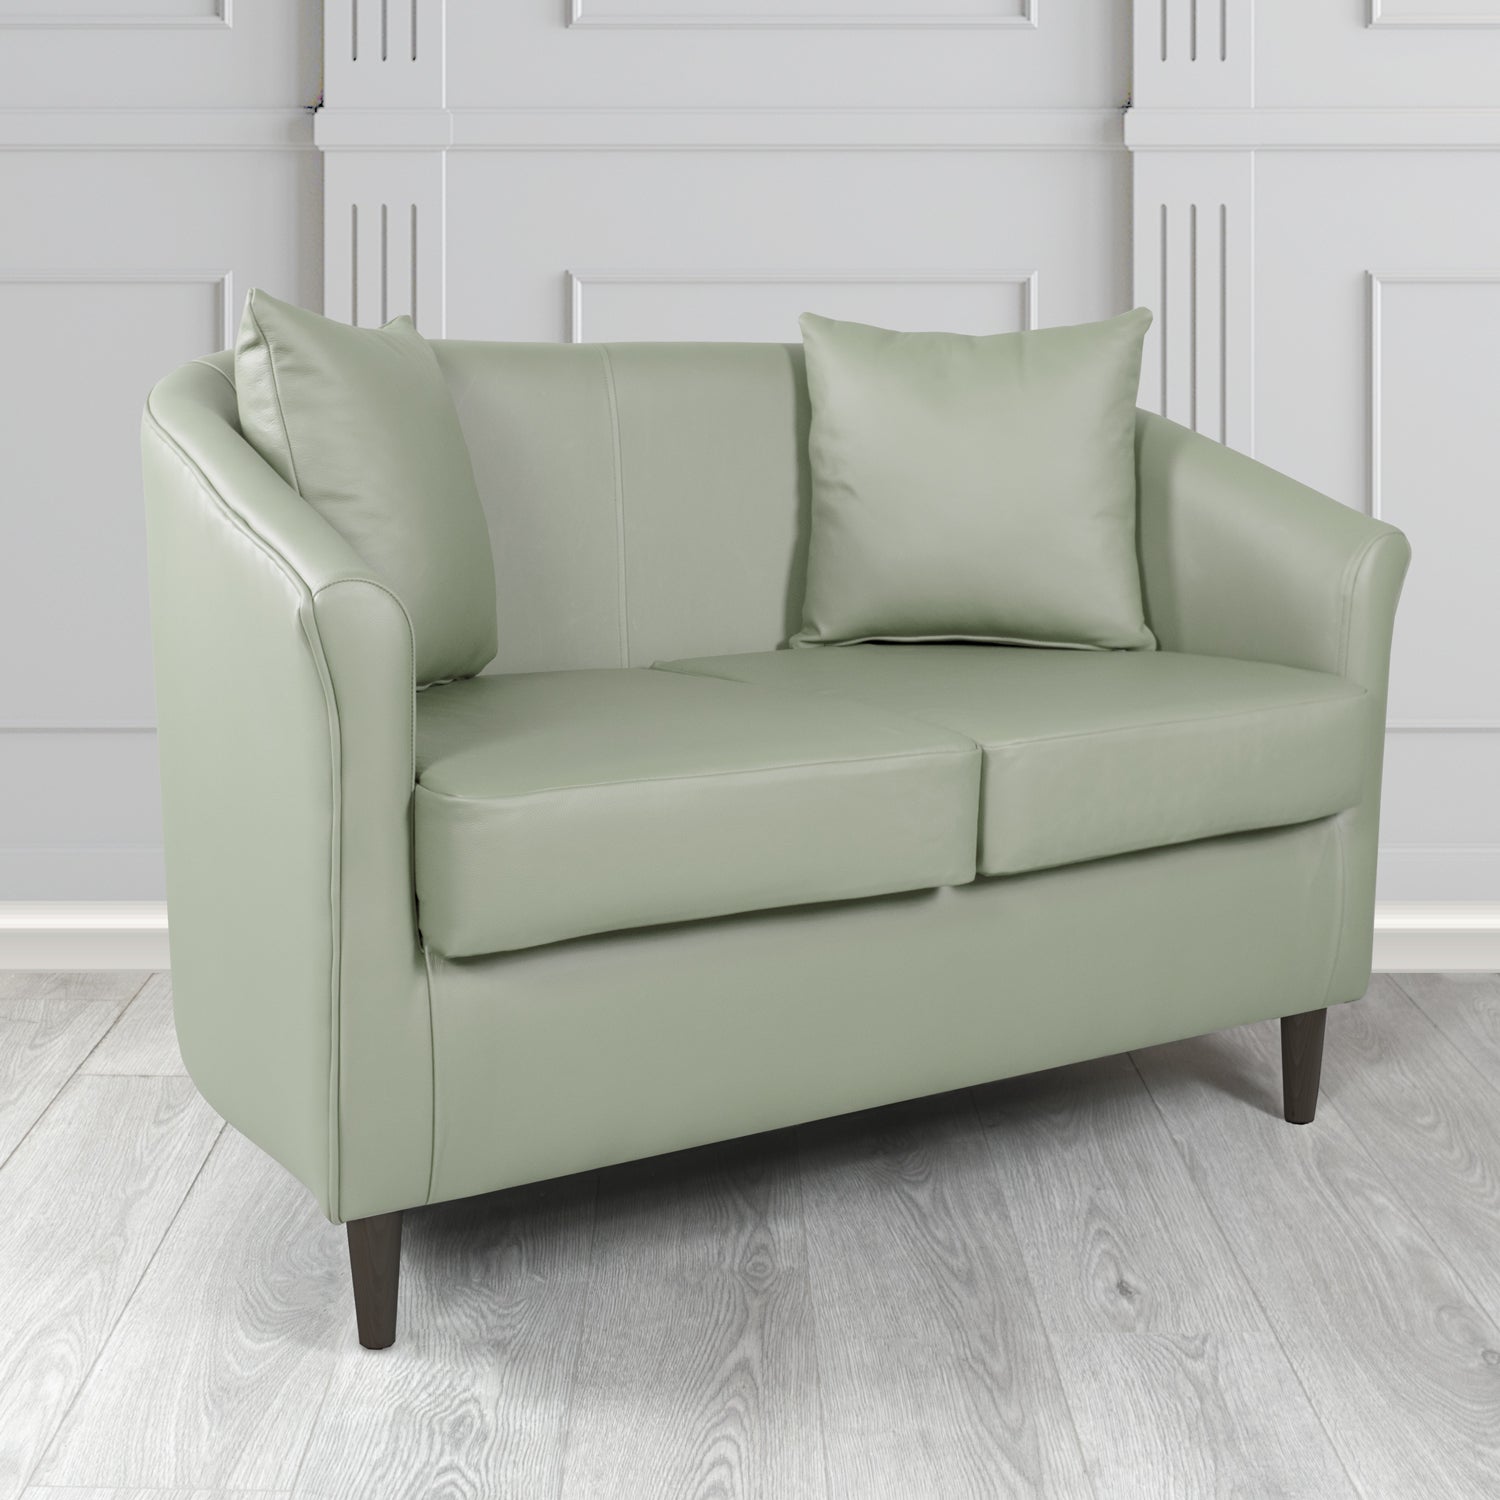 St Tropez Shelly Moon Mist Crib 5 Genuine Leather 2 Seater Tub Sofa with Scatter Cushions - The Tub Chair Shop